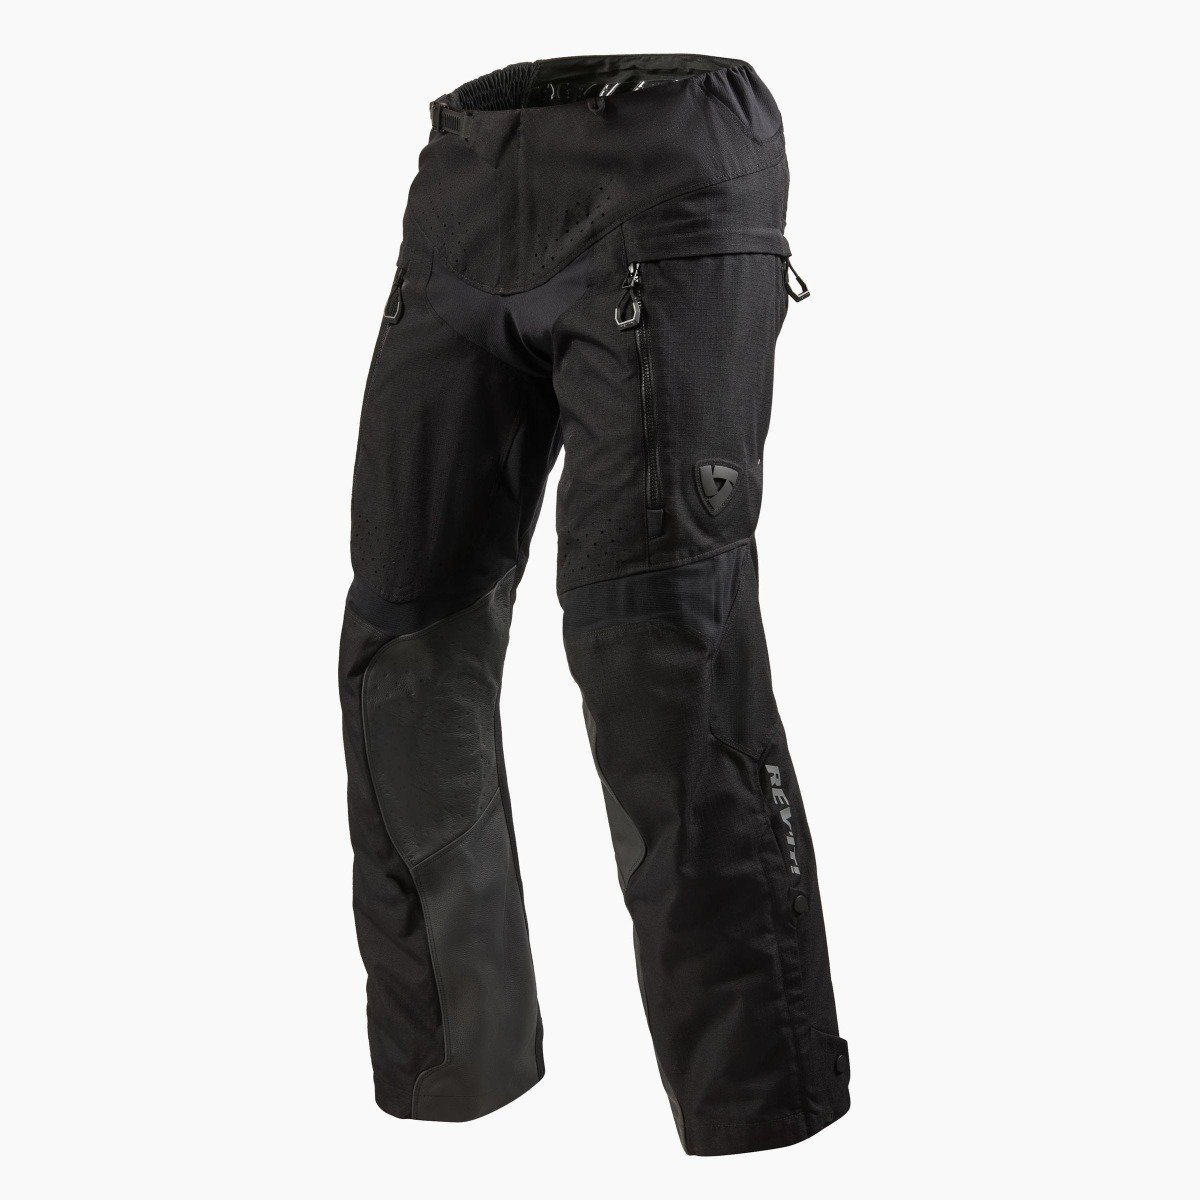 Image of REV'IT! Continent Long Black Motorcycle Pants Size M ID 8700001297134